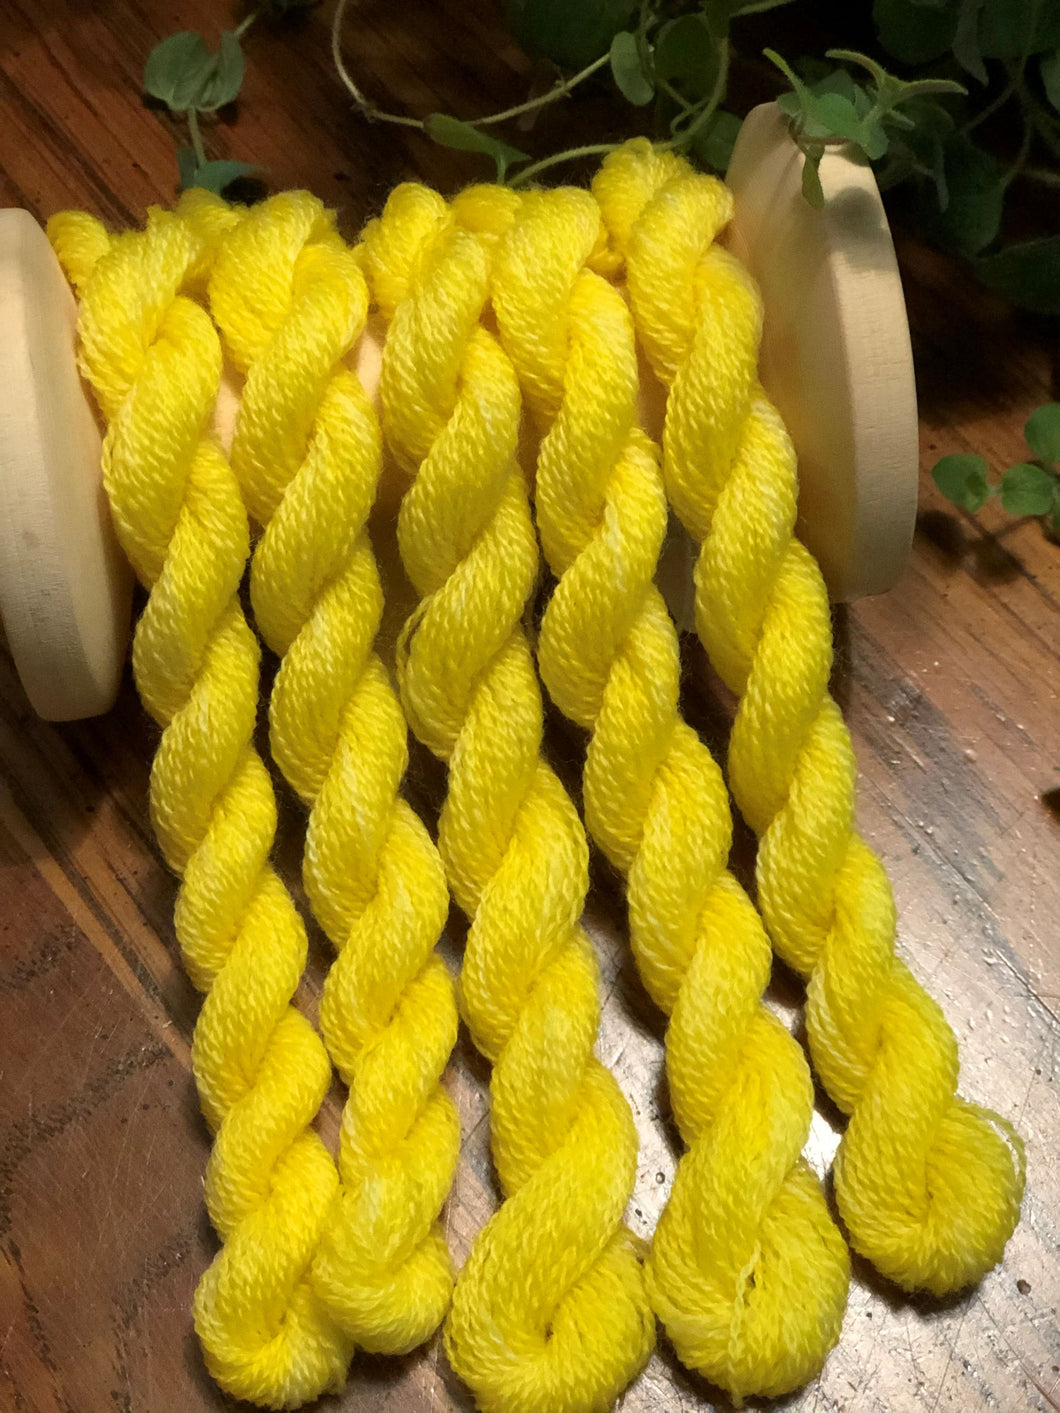 Five skeins of hand dyed sunny yellow wool thread draped over a vintage spool 